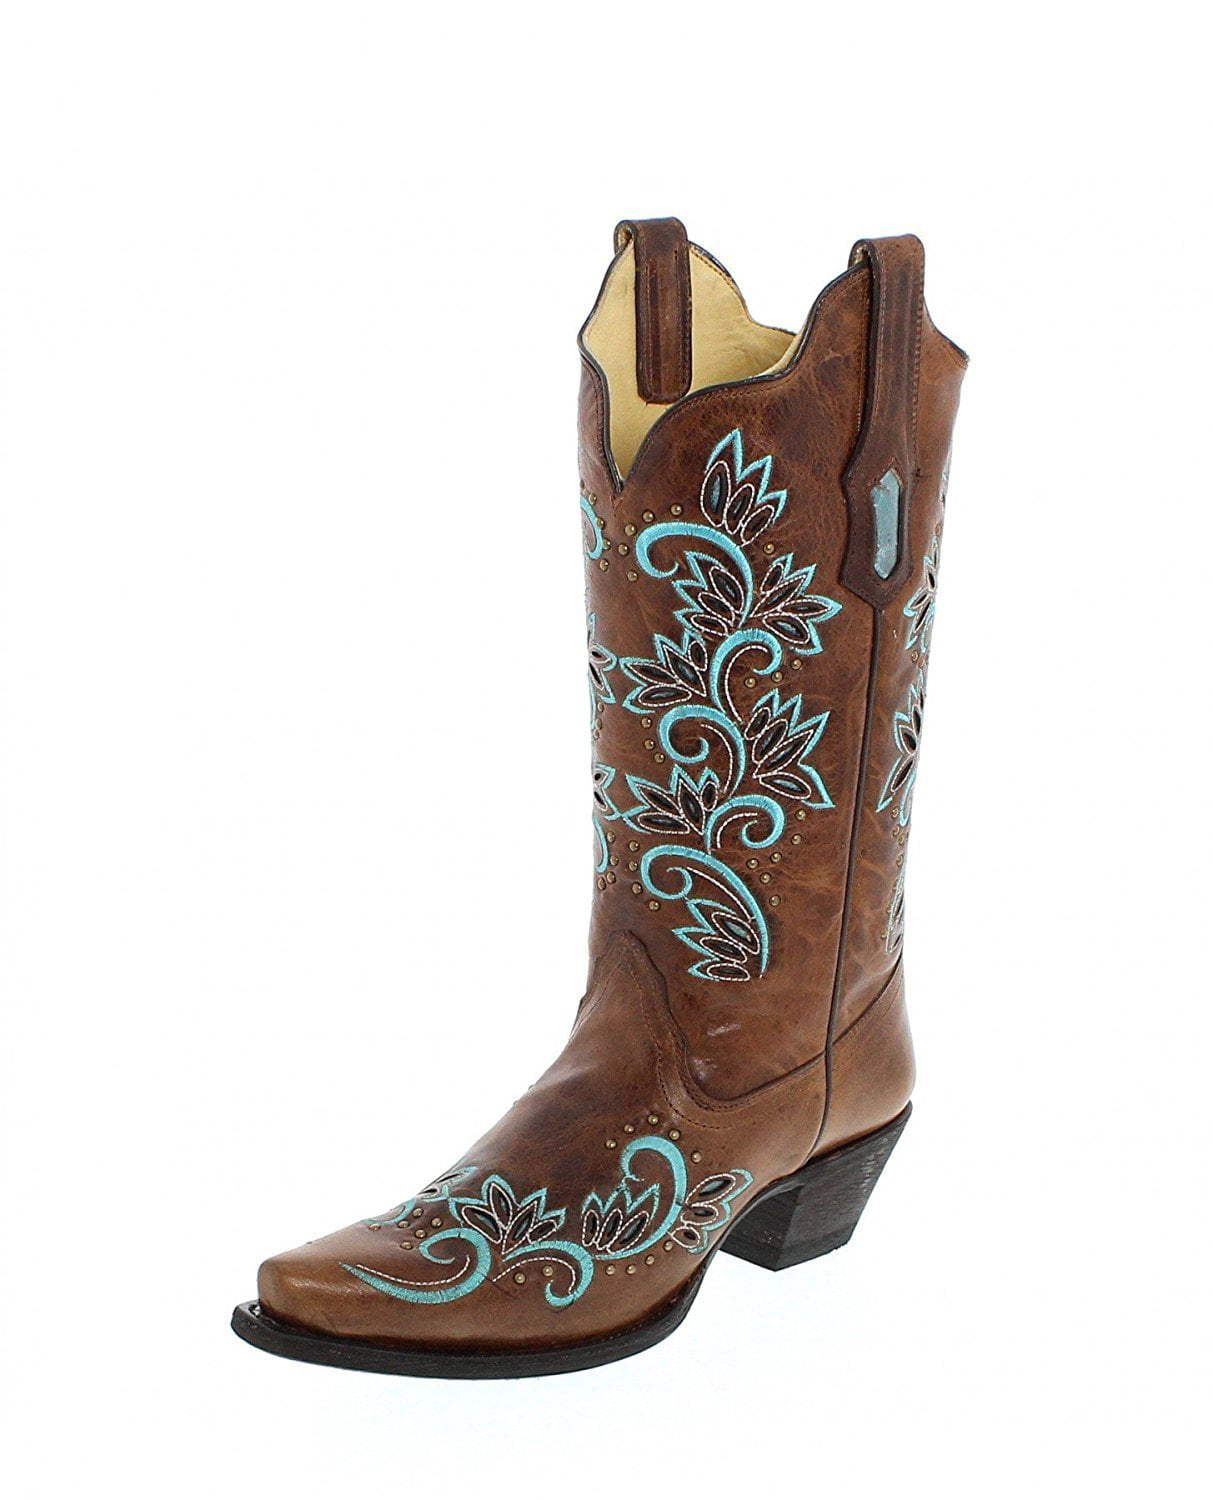 Women's New Beautiful Studded Leather Cowgirl Western Boots Snip Turquoise 